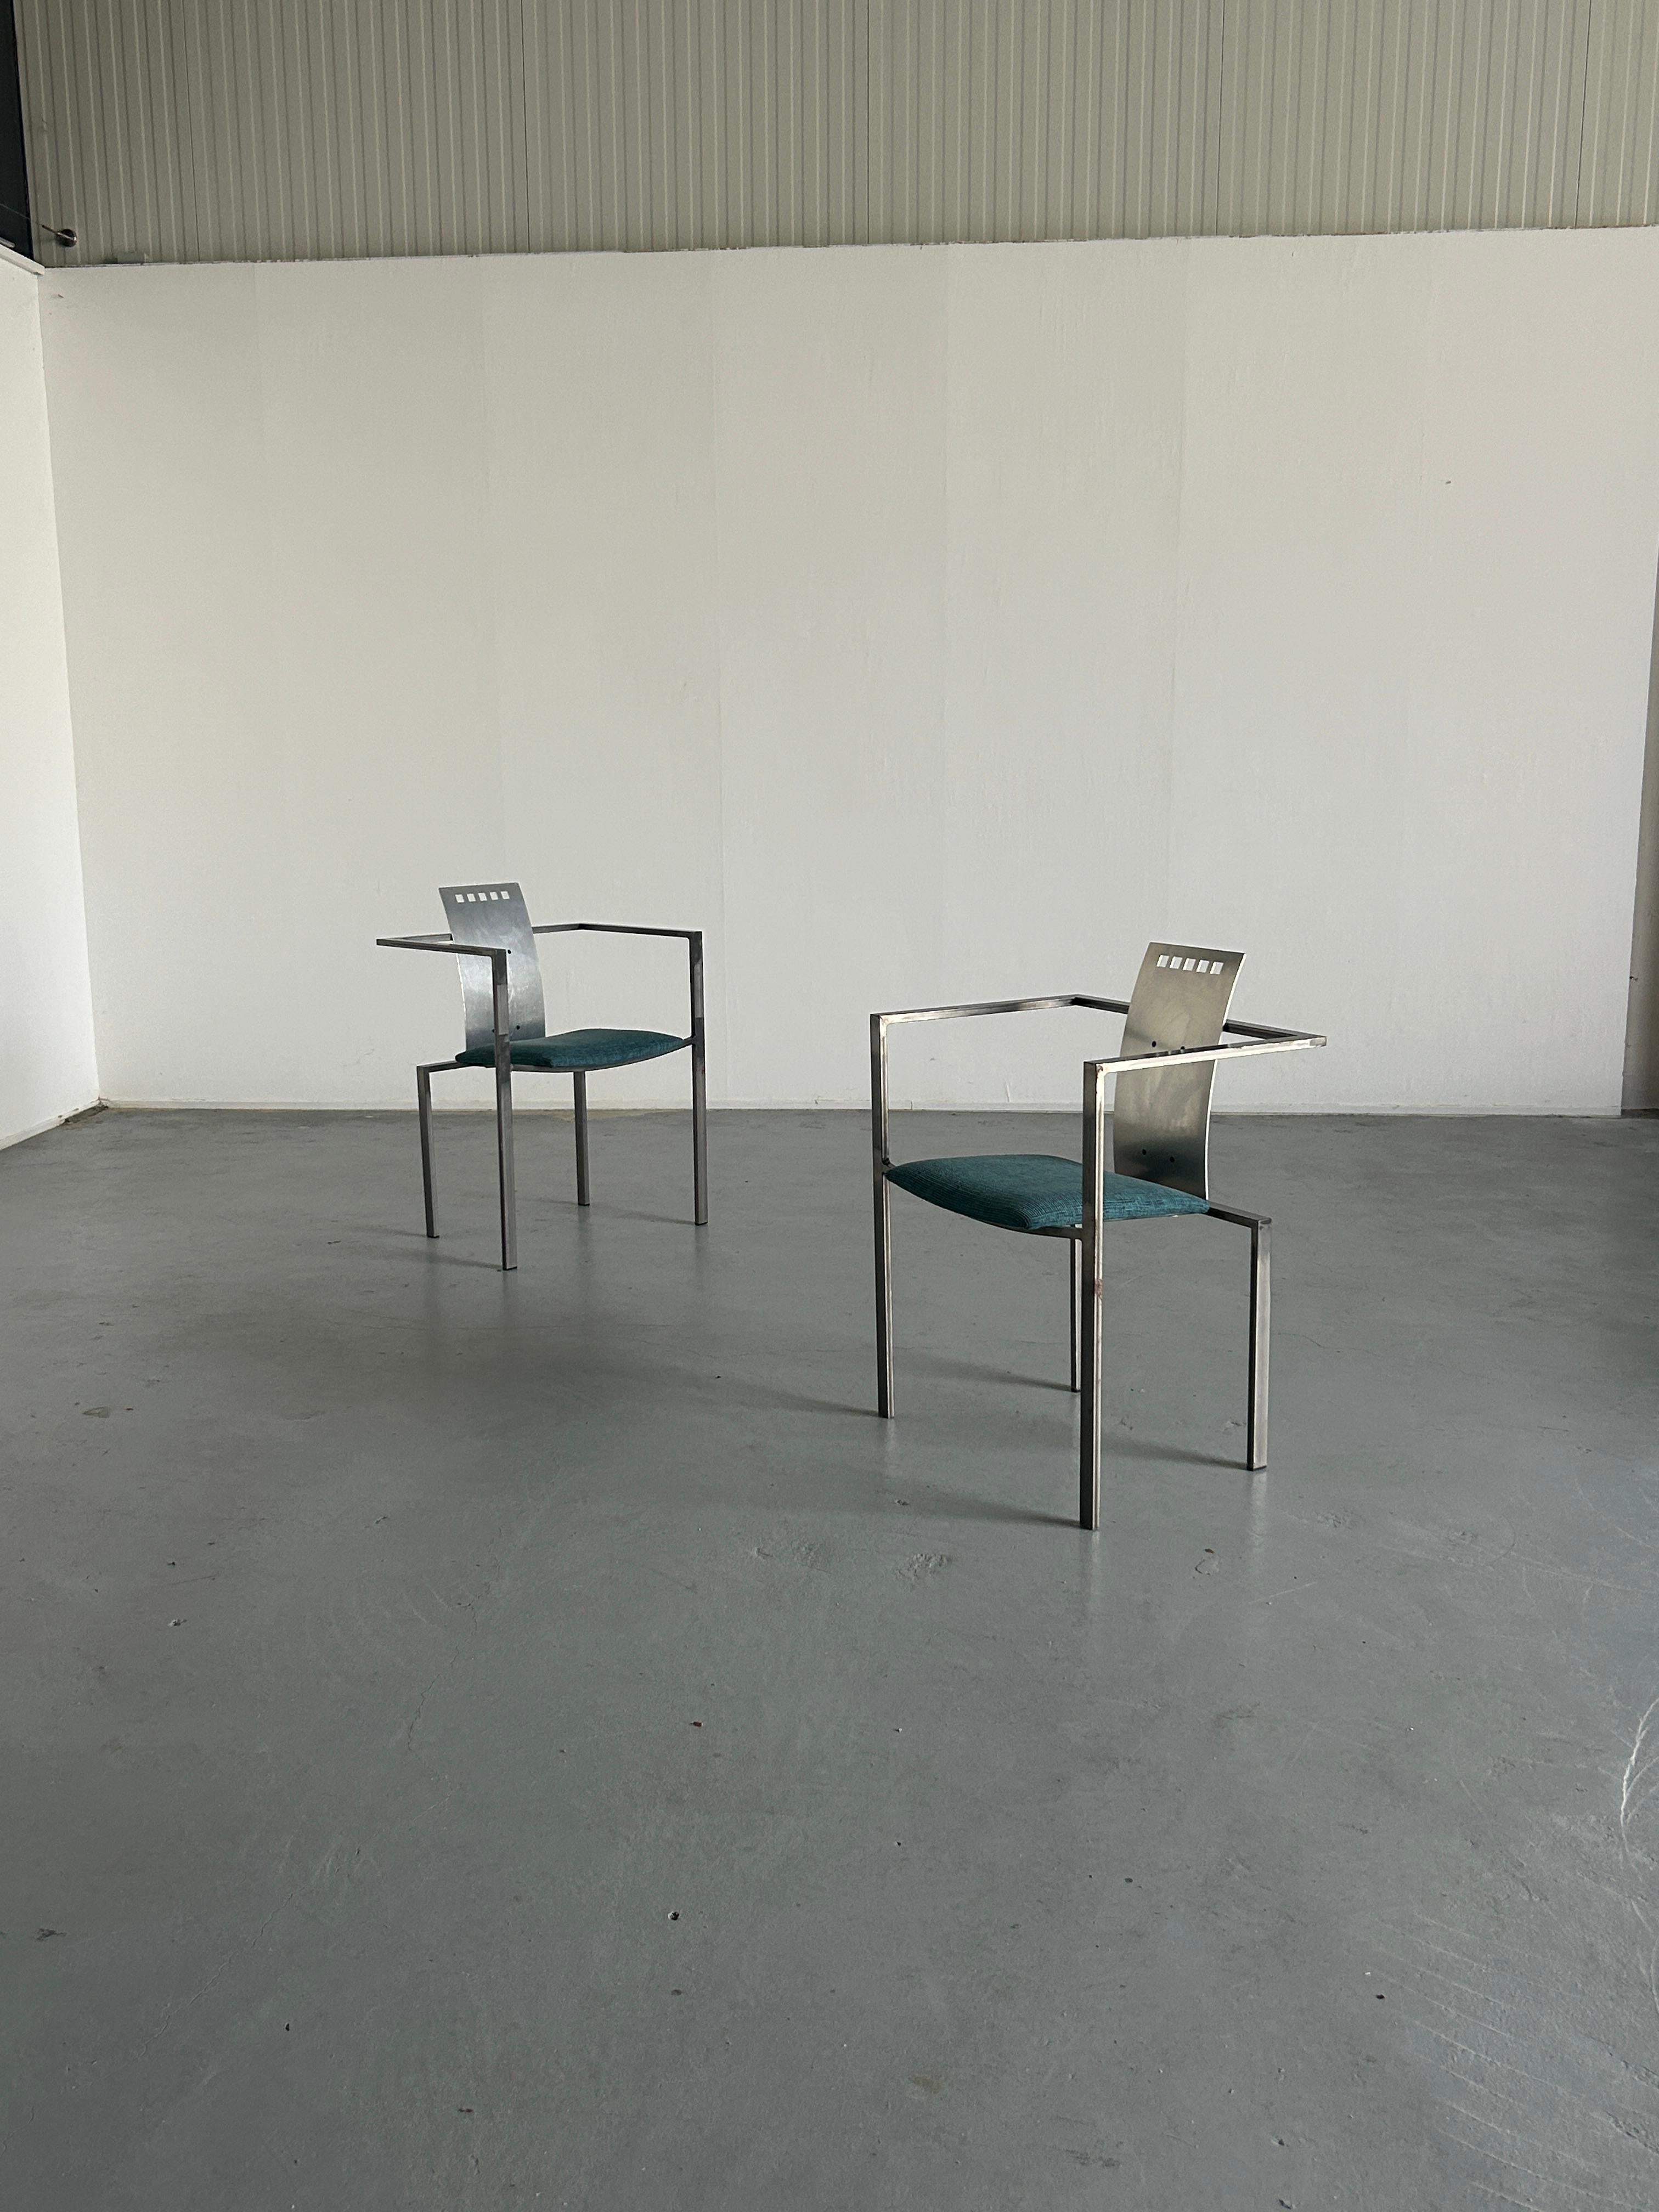 Post-Modern 1 of 2 Memphis Design Postmodern Chairs by Karl Friedrich Förster for KFF, 1980s For Sale